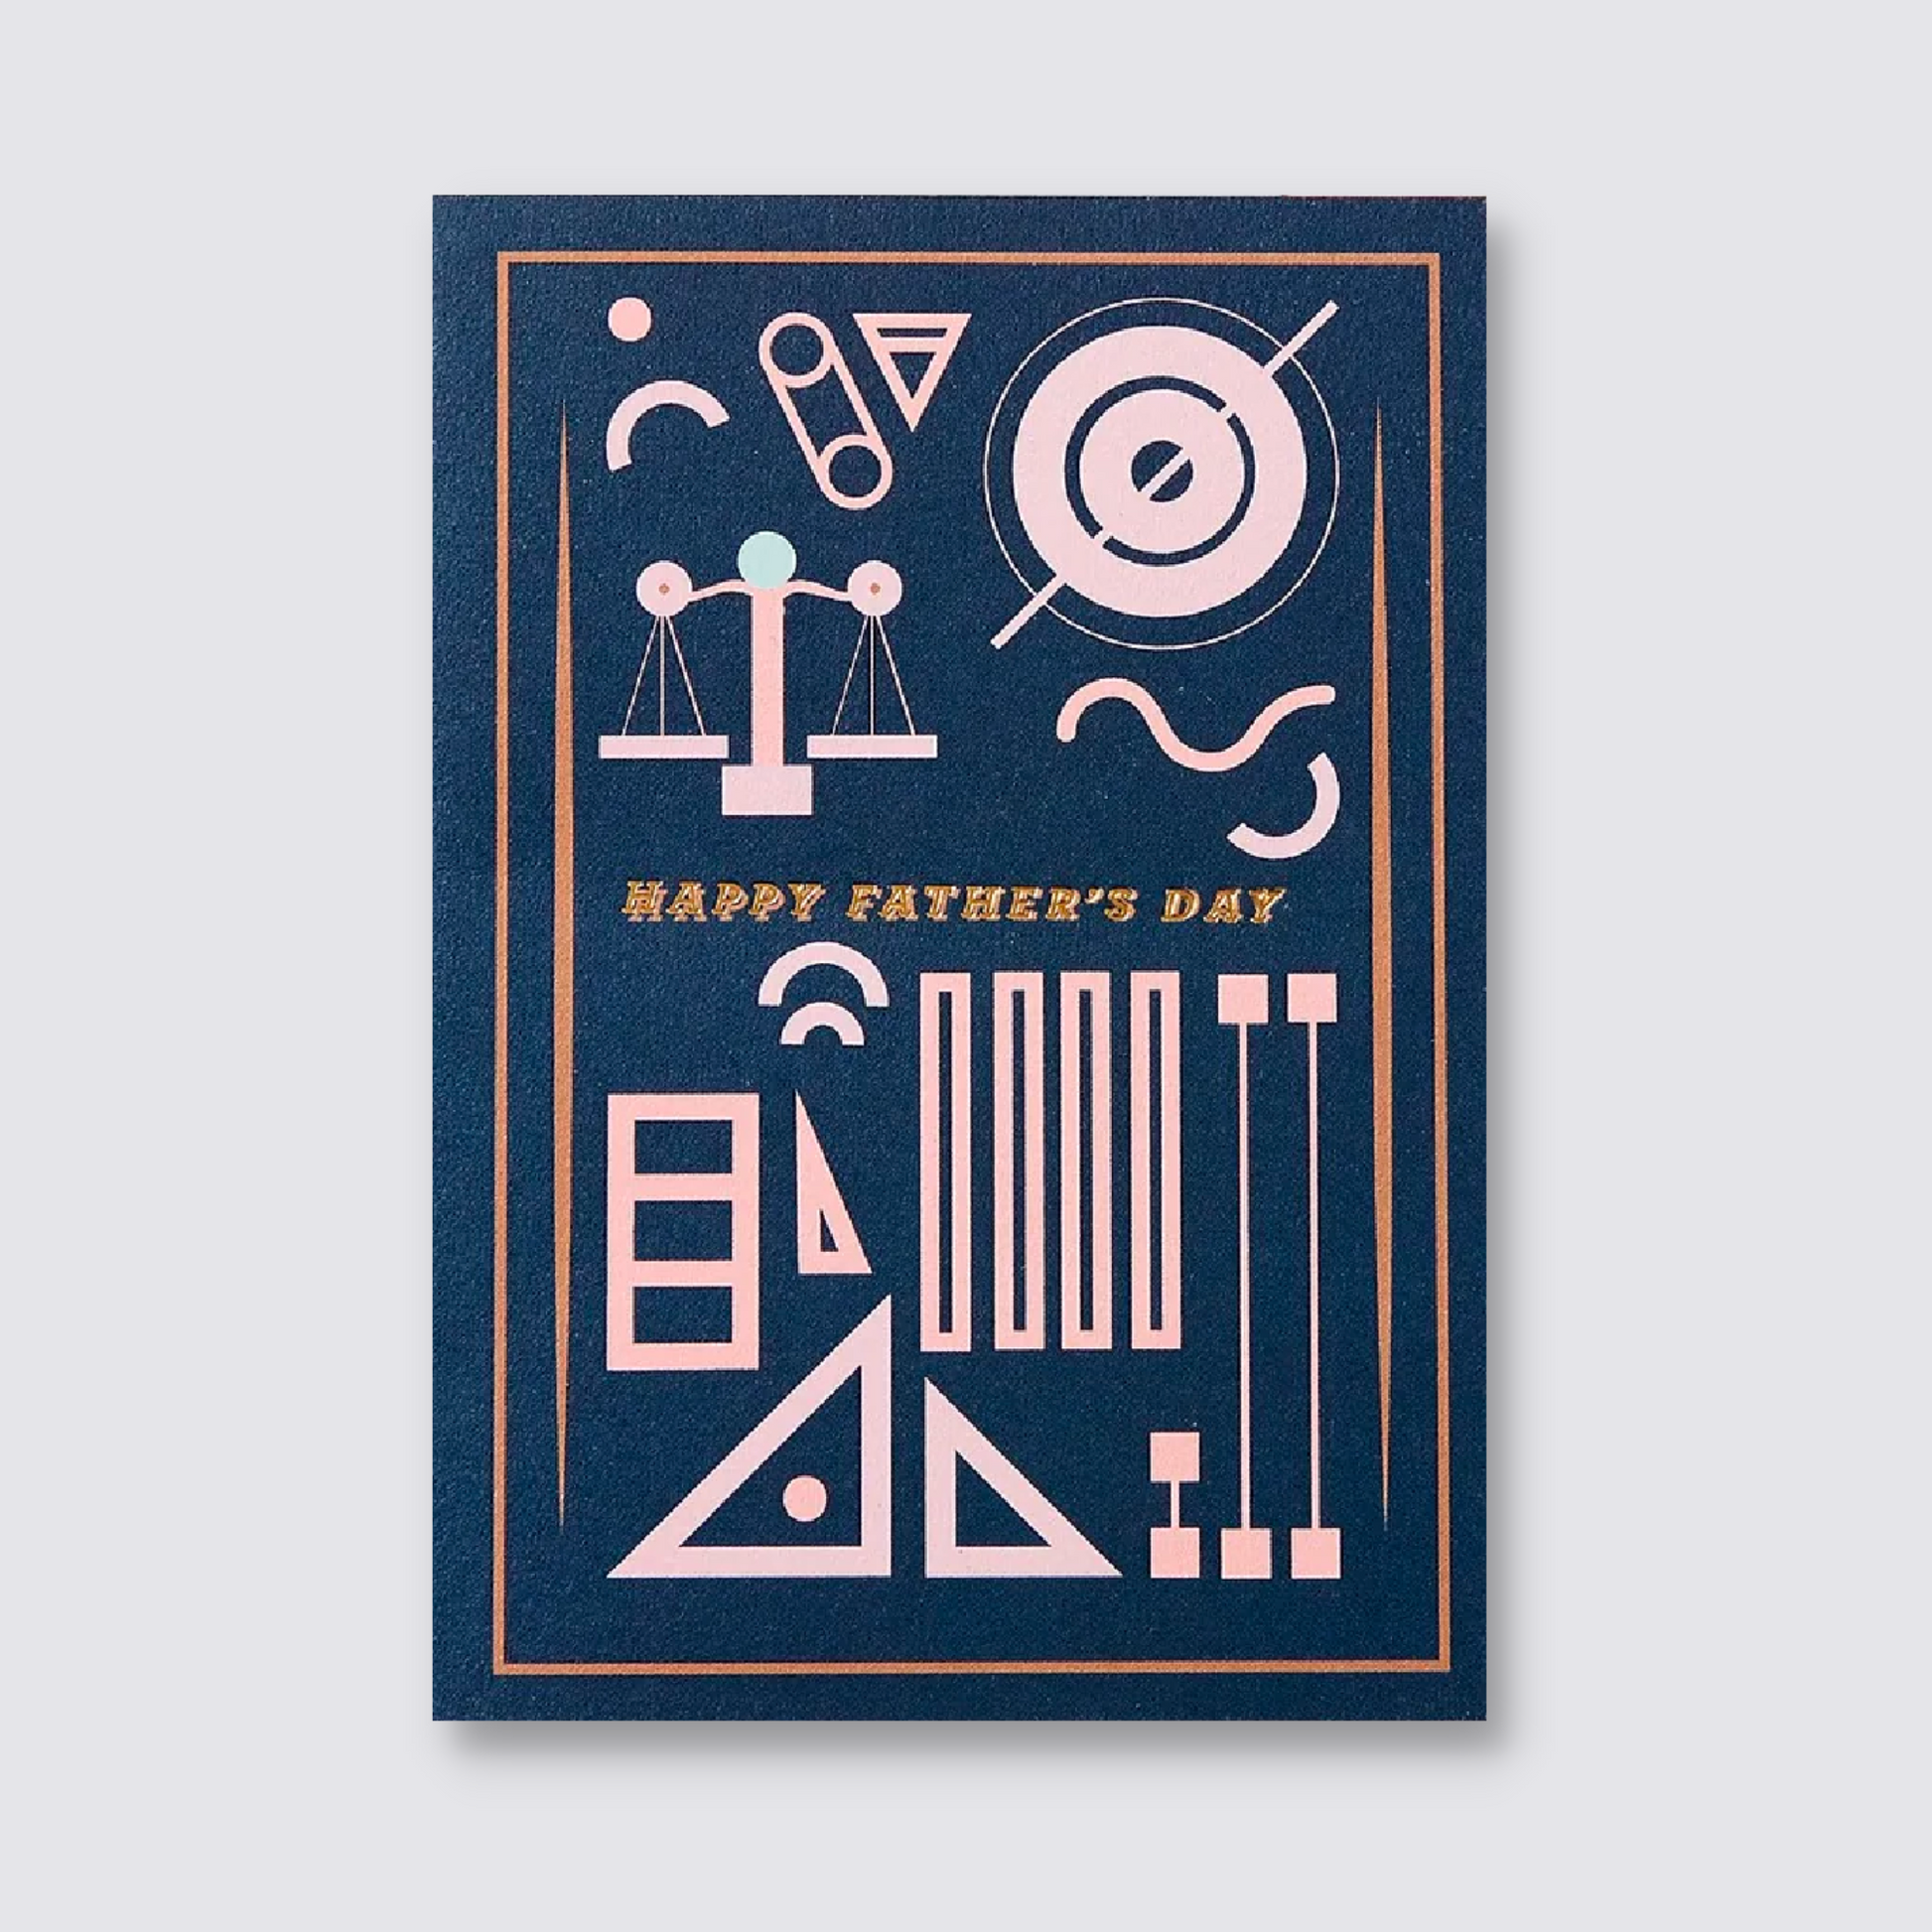 Happy Father's Day Tools Card